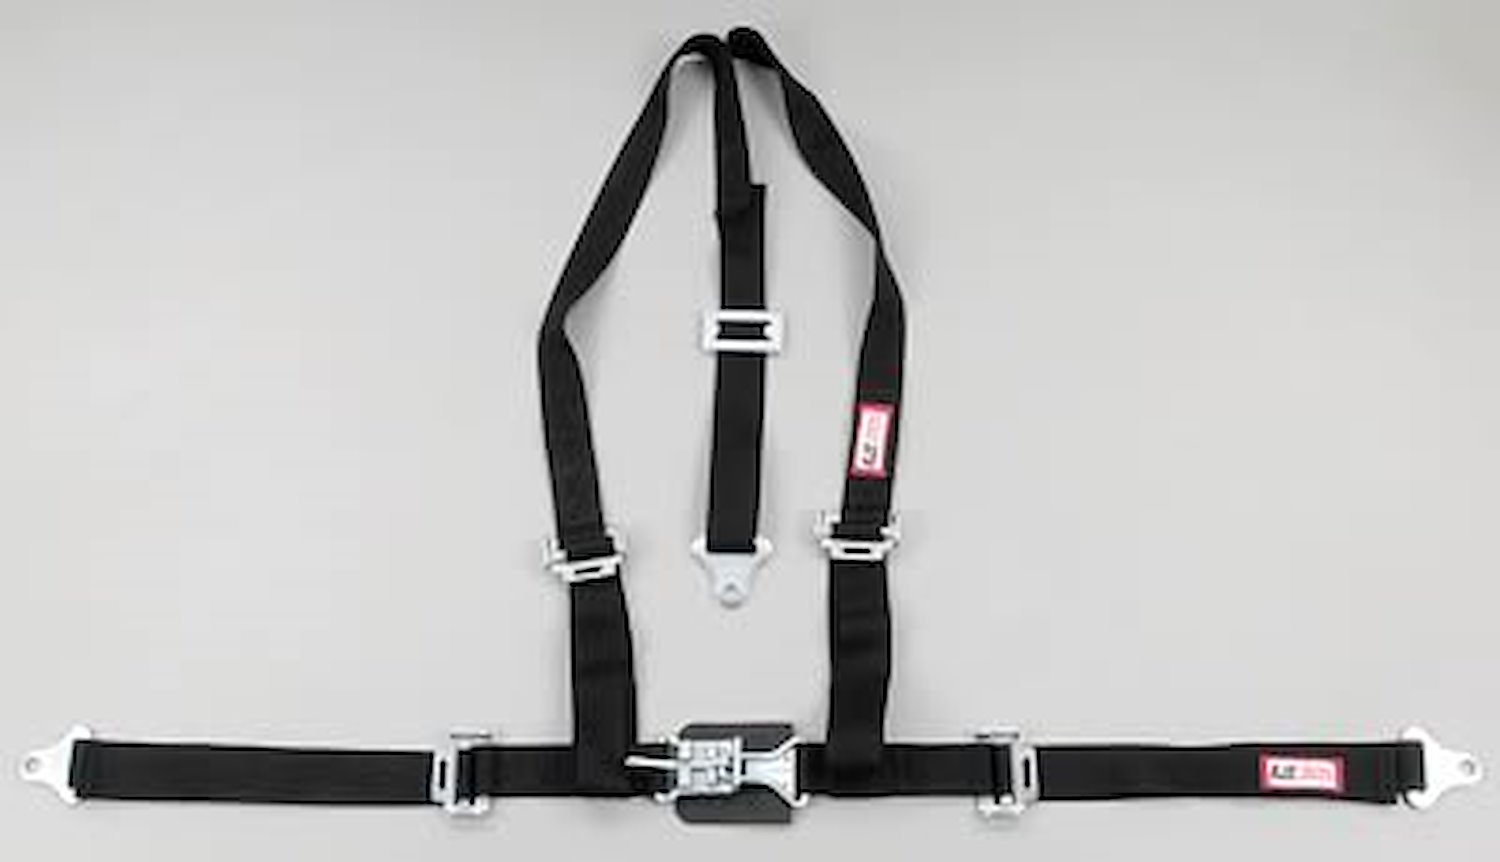 NON-SFI L&L HARNESS 2 PULL DOWN Lap Belt SEWN IN 2 S.H. V ROLL BAR Mount ALL WRAP ENDS BLACK